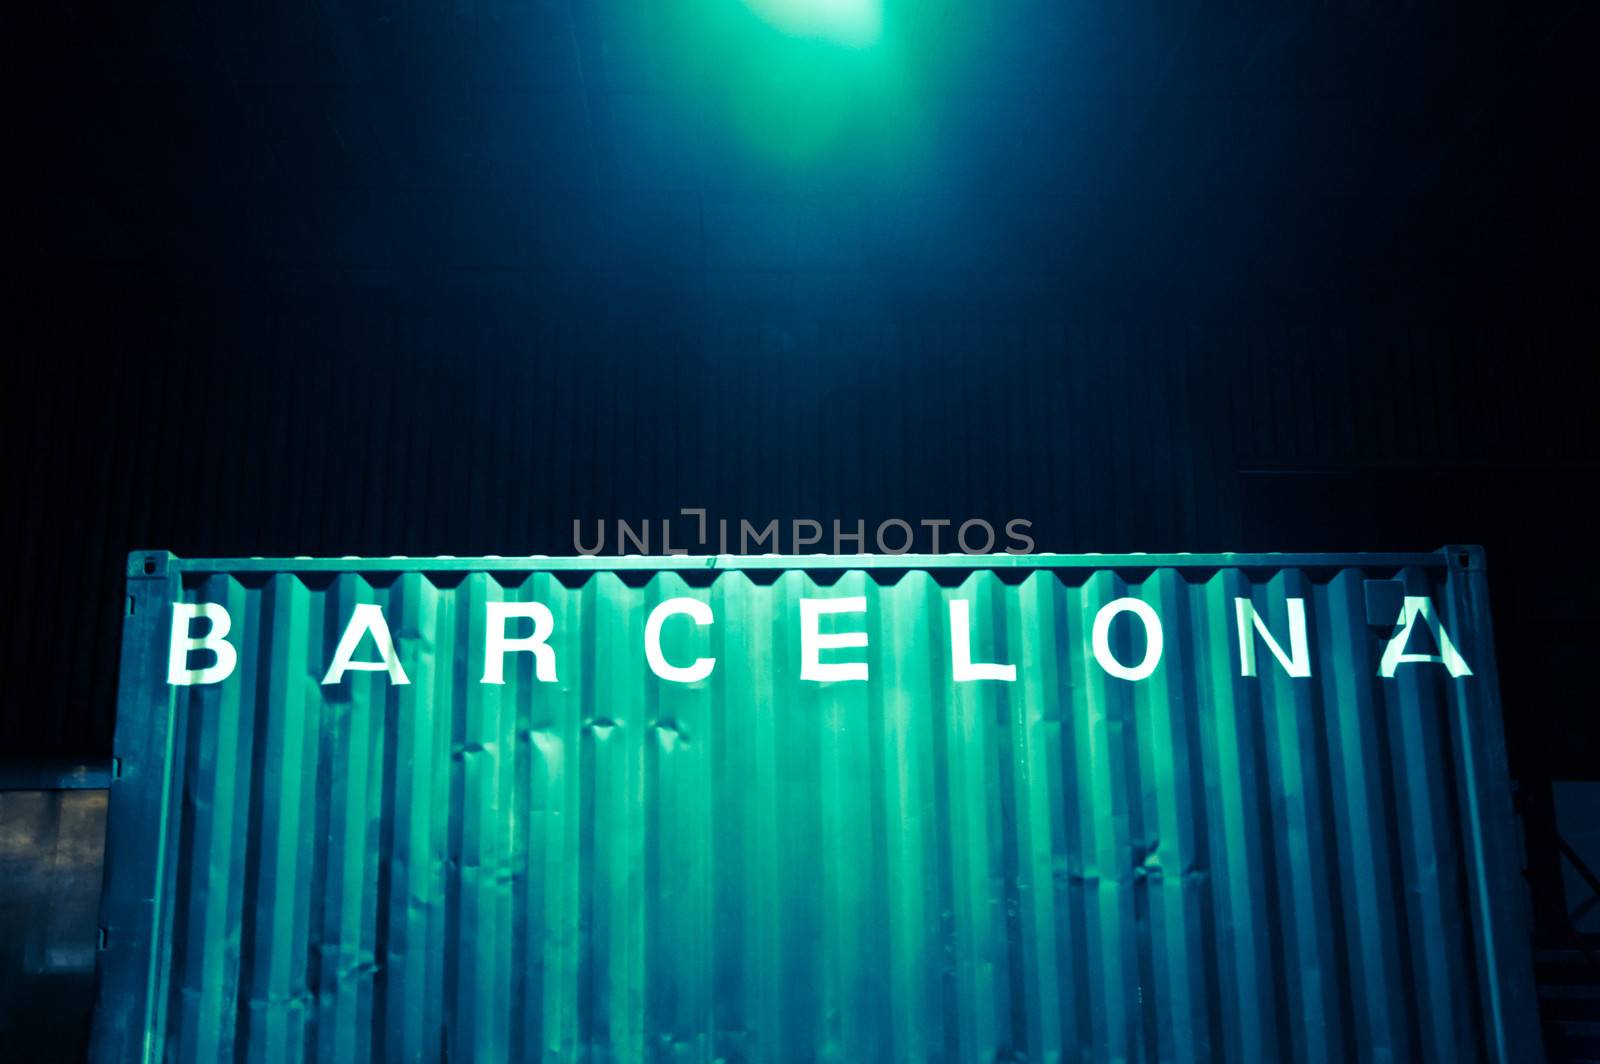 Barcelona lettering on a container at night  - Toned blue color